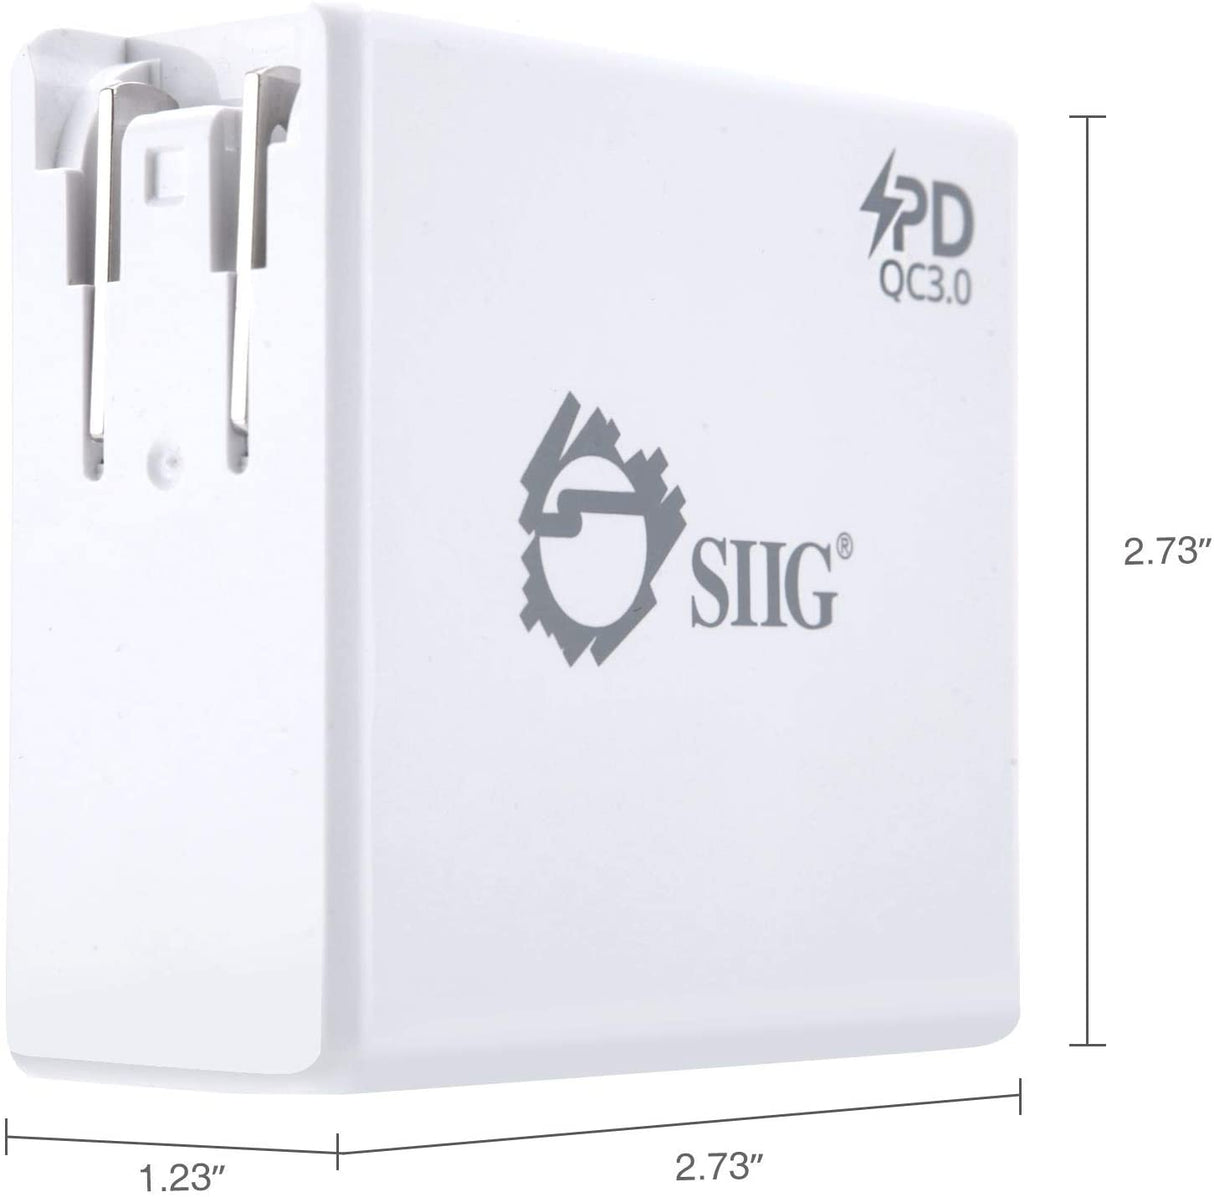 SIIG 65W USB Type C Wall Charger (USB C Power Adapter/USB C Laptop Charger/USB-C PD Charger) with Power Delivery &amp; QC 3.0 USB Port for MacBook Pro, Laptops with USB C Charging, Smart Phones